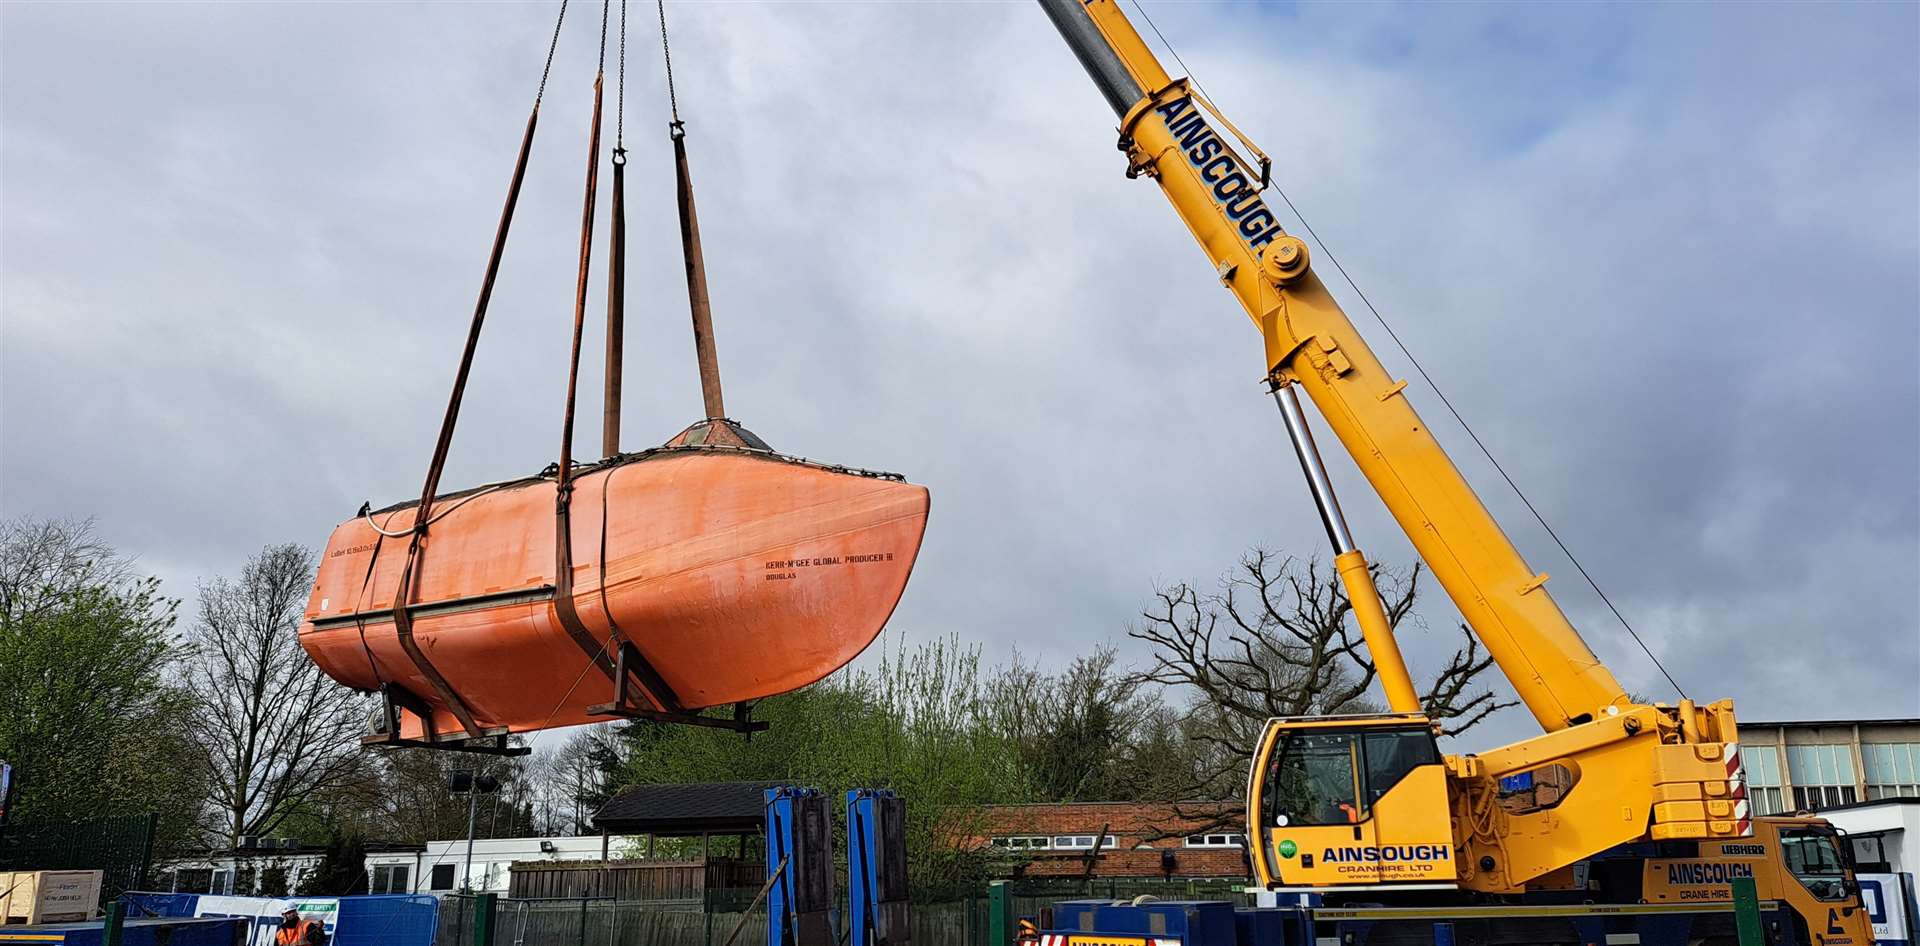 The lifeboat is craned into position